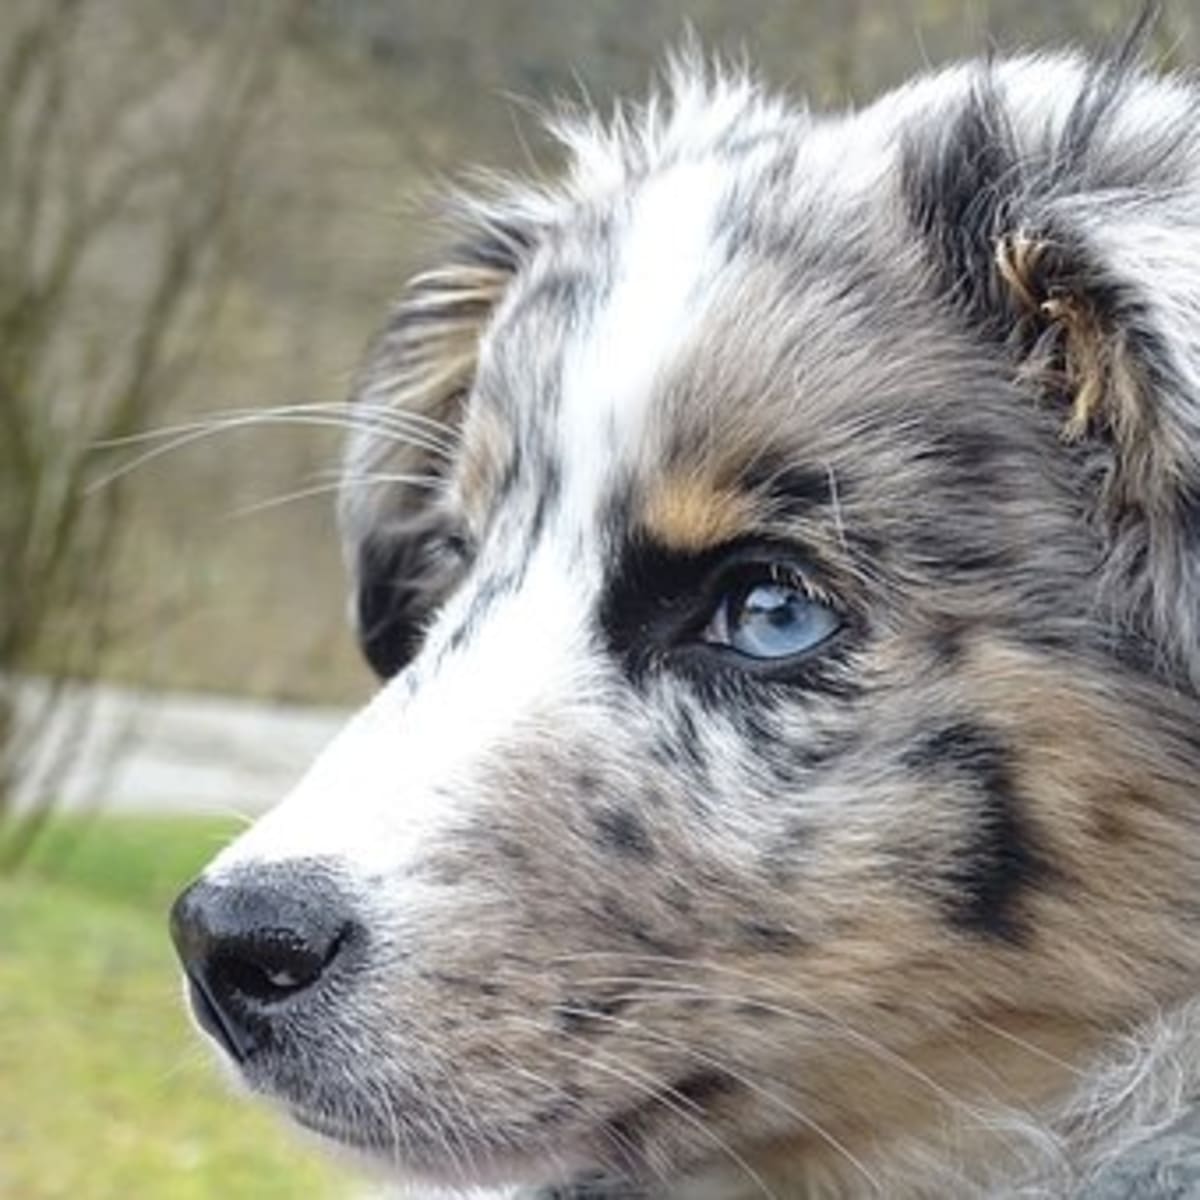 25 Australian Slang Names For Your Australian Shepherd Pethelpful By Fellow Animal Lovers And Experts